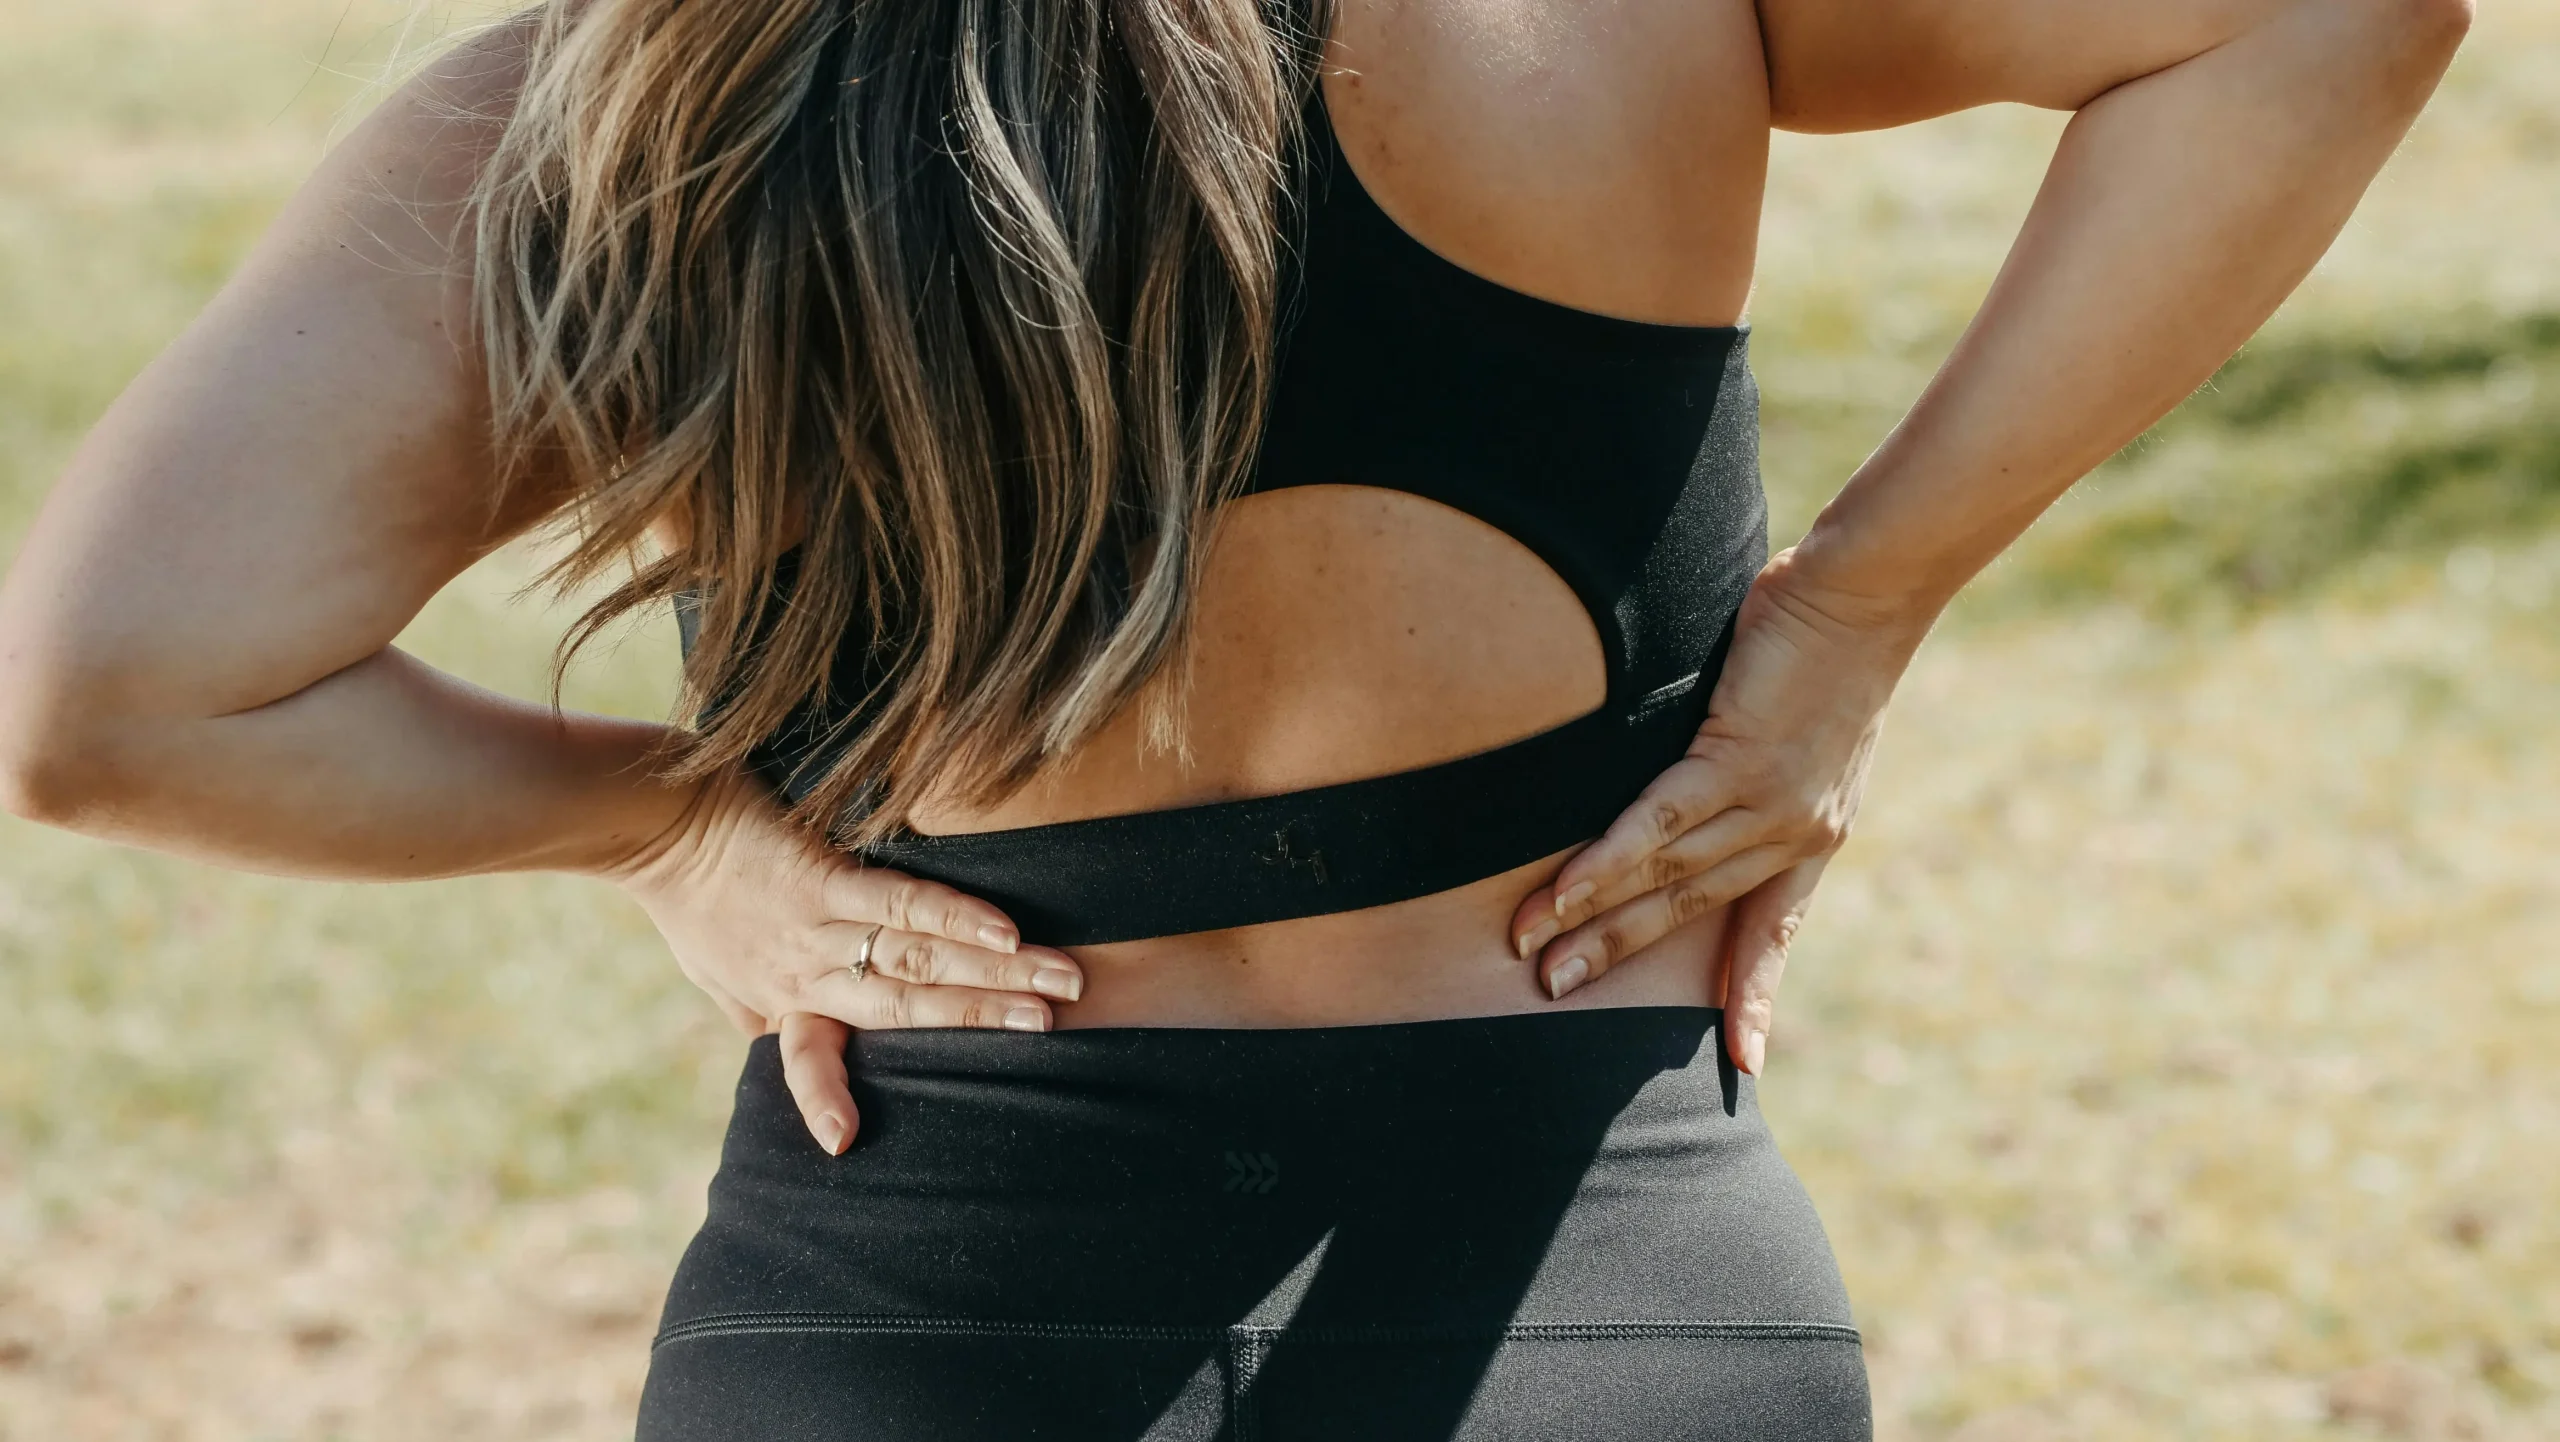 Read more about the article Throwing out your back can cause crushing pain: The life-changing impact of Throwing out your back and how to manage the pain